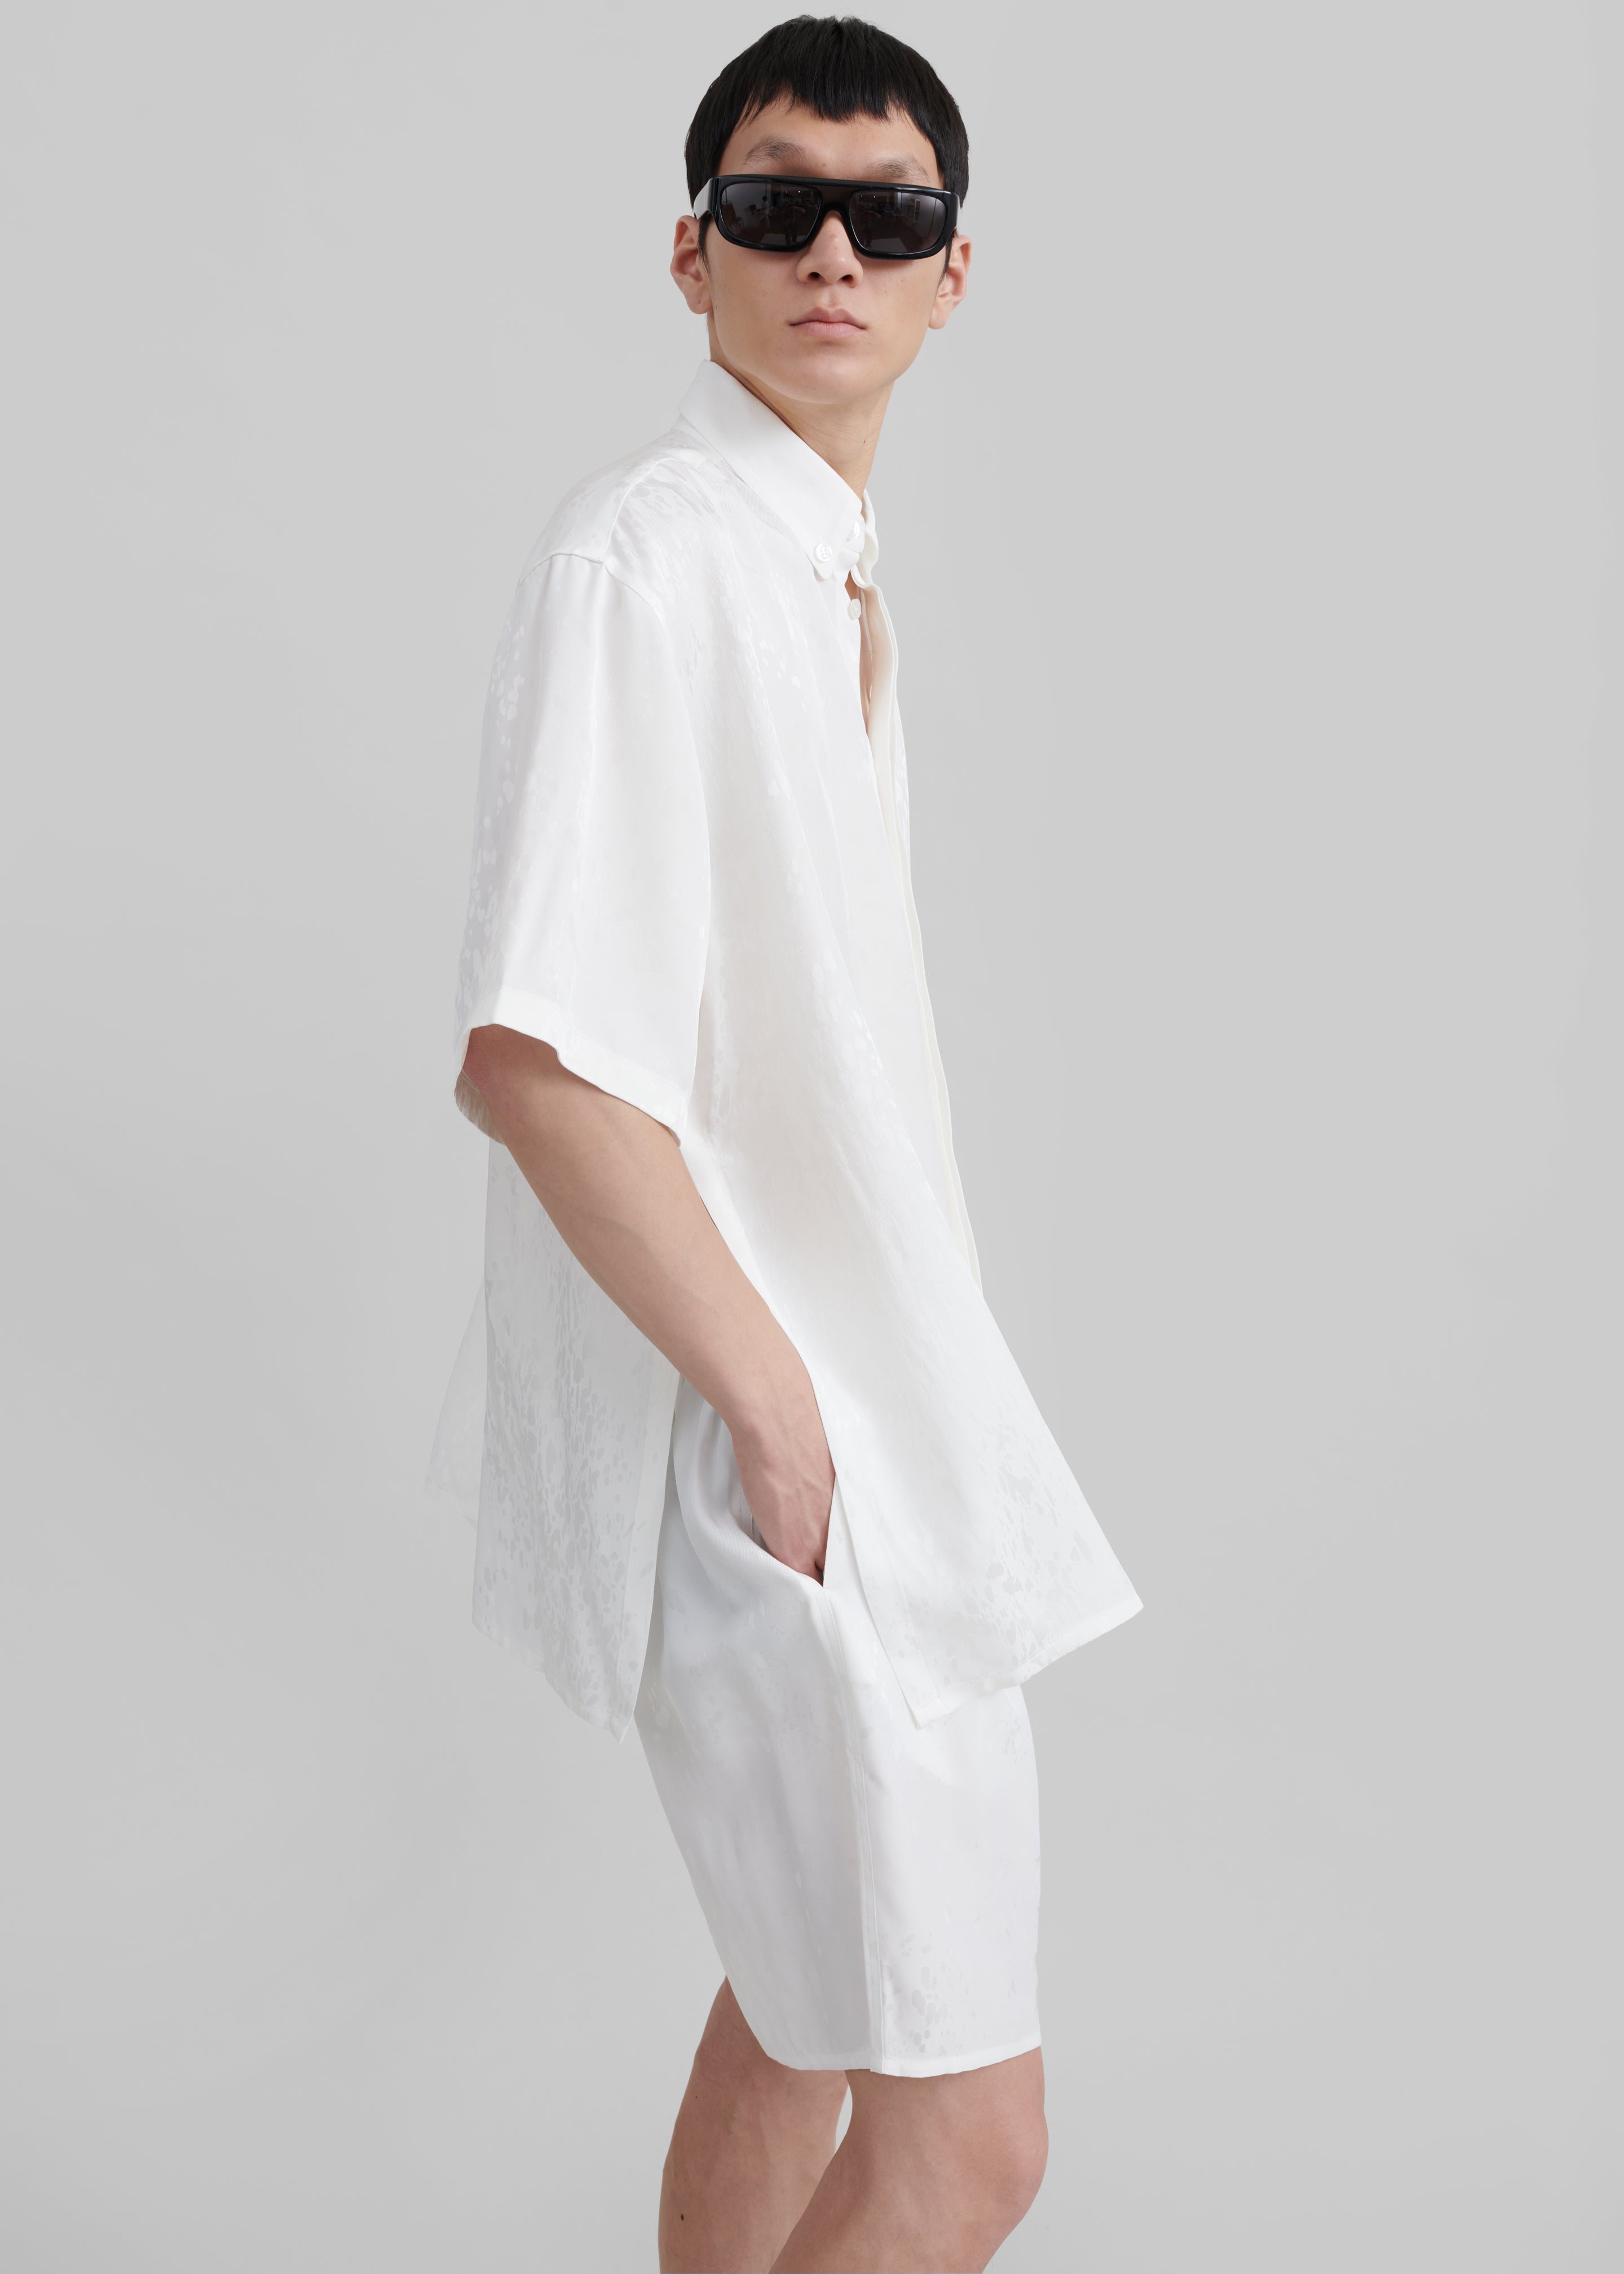 Louis Gabriel Nouchi Short Sleeves Shirt With Side Slits - White - 5